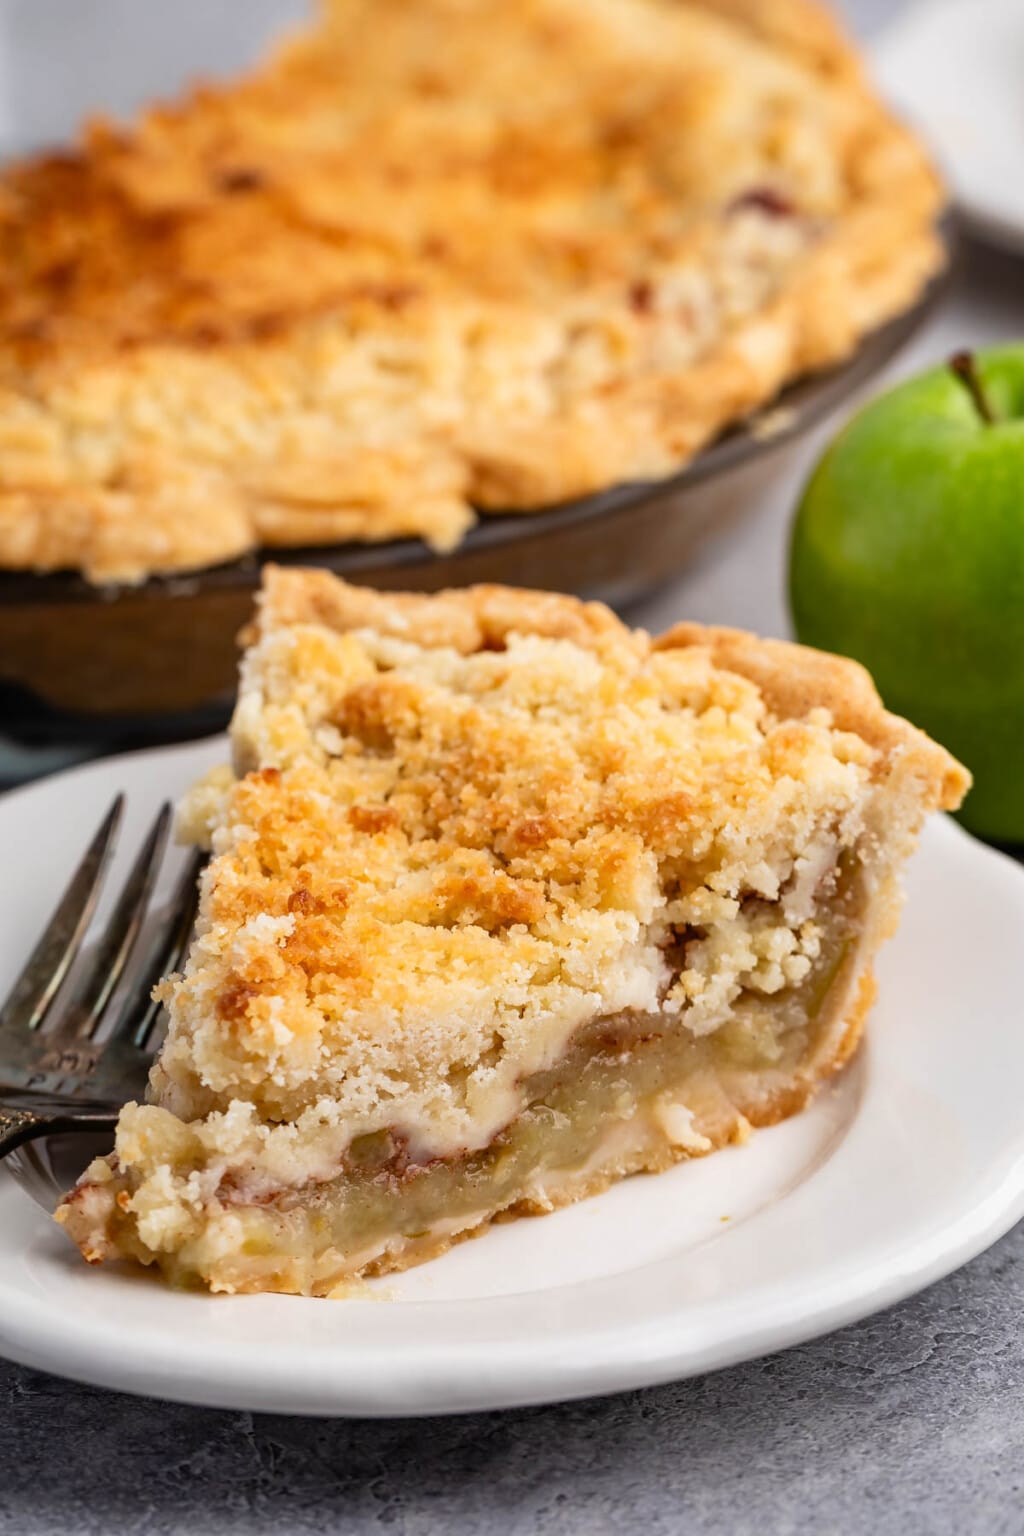 Apple Pie with Crumb Topping Recipe - Crazy for Crust